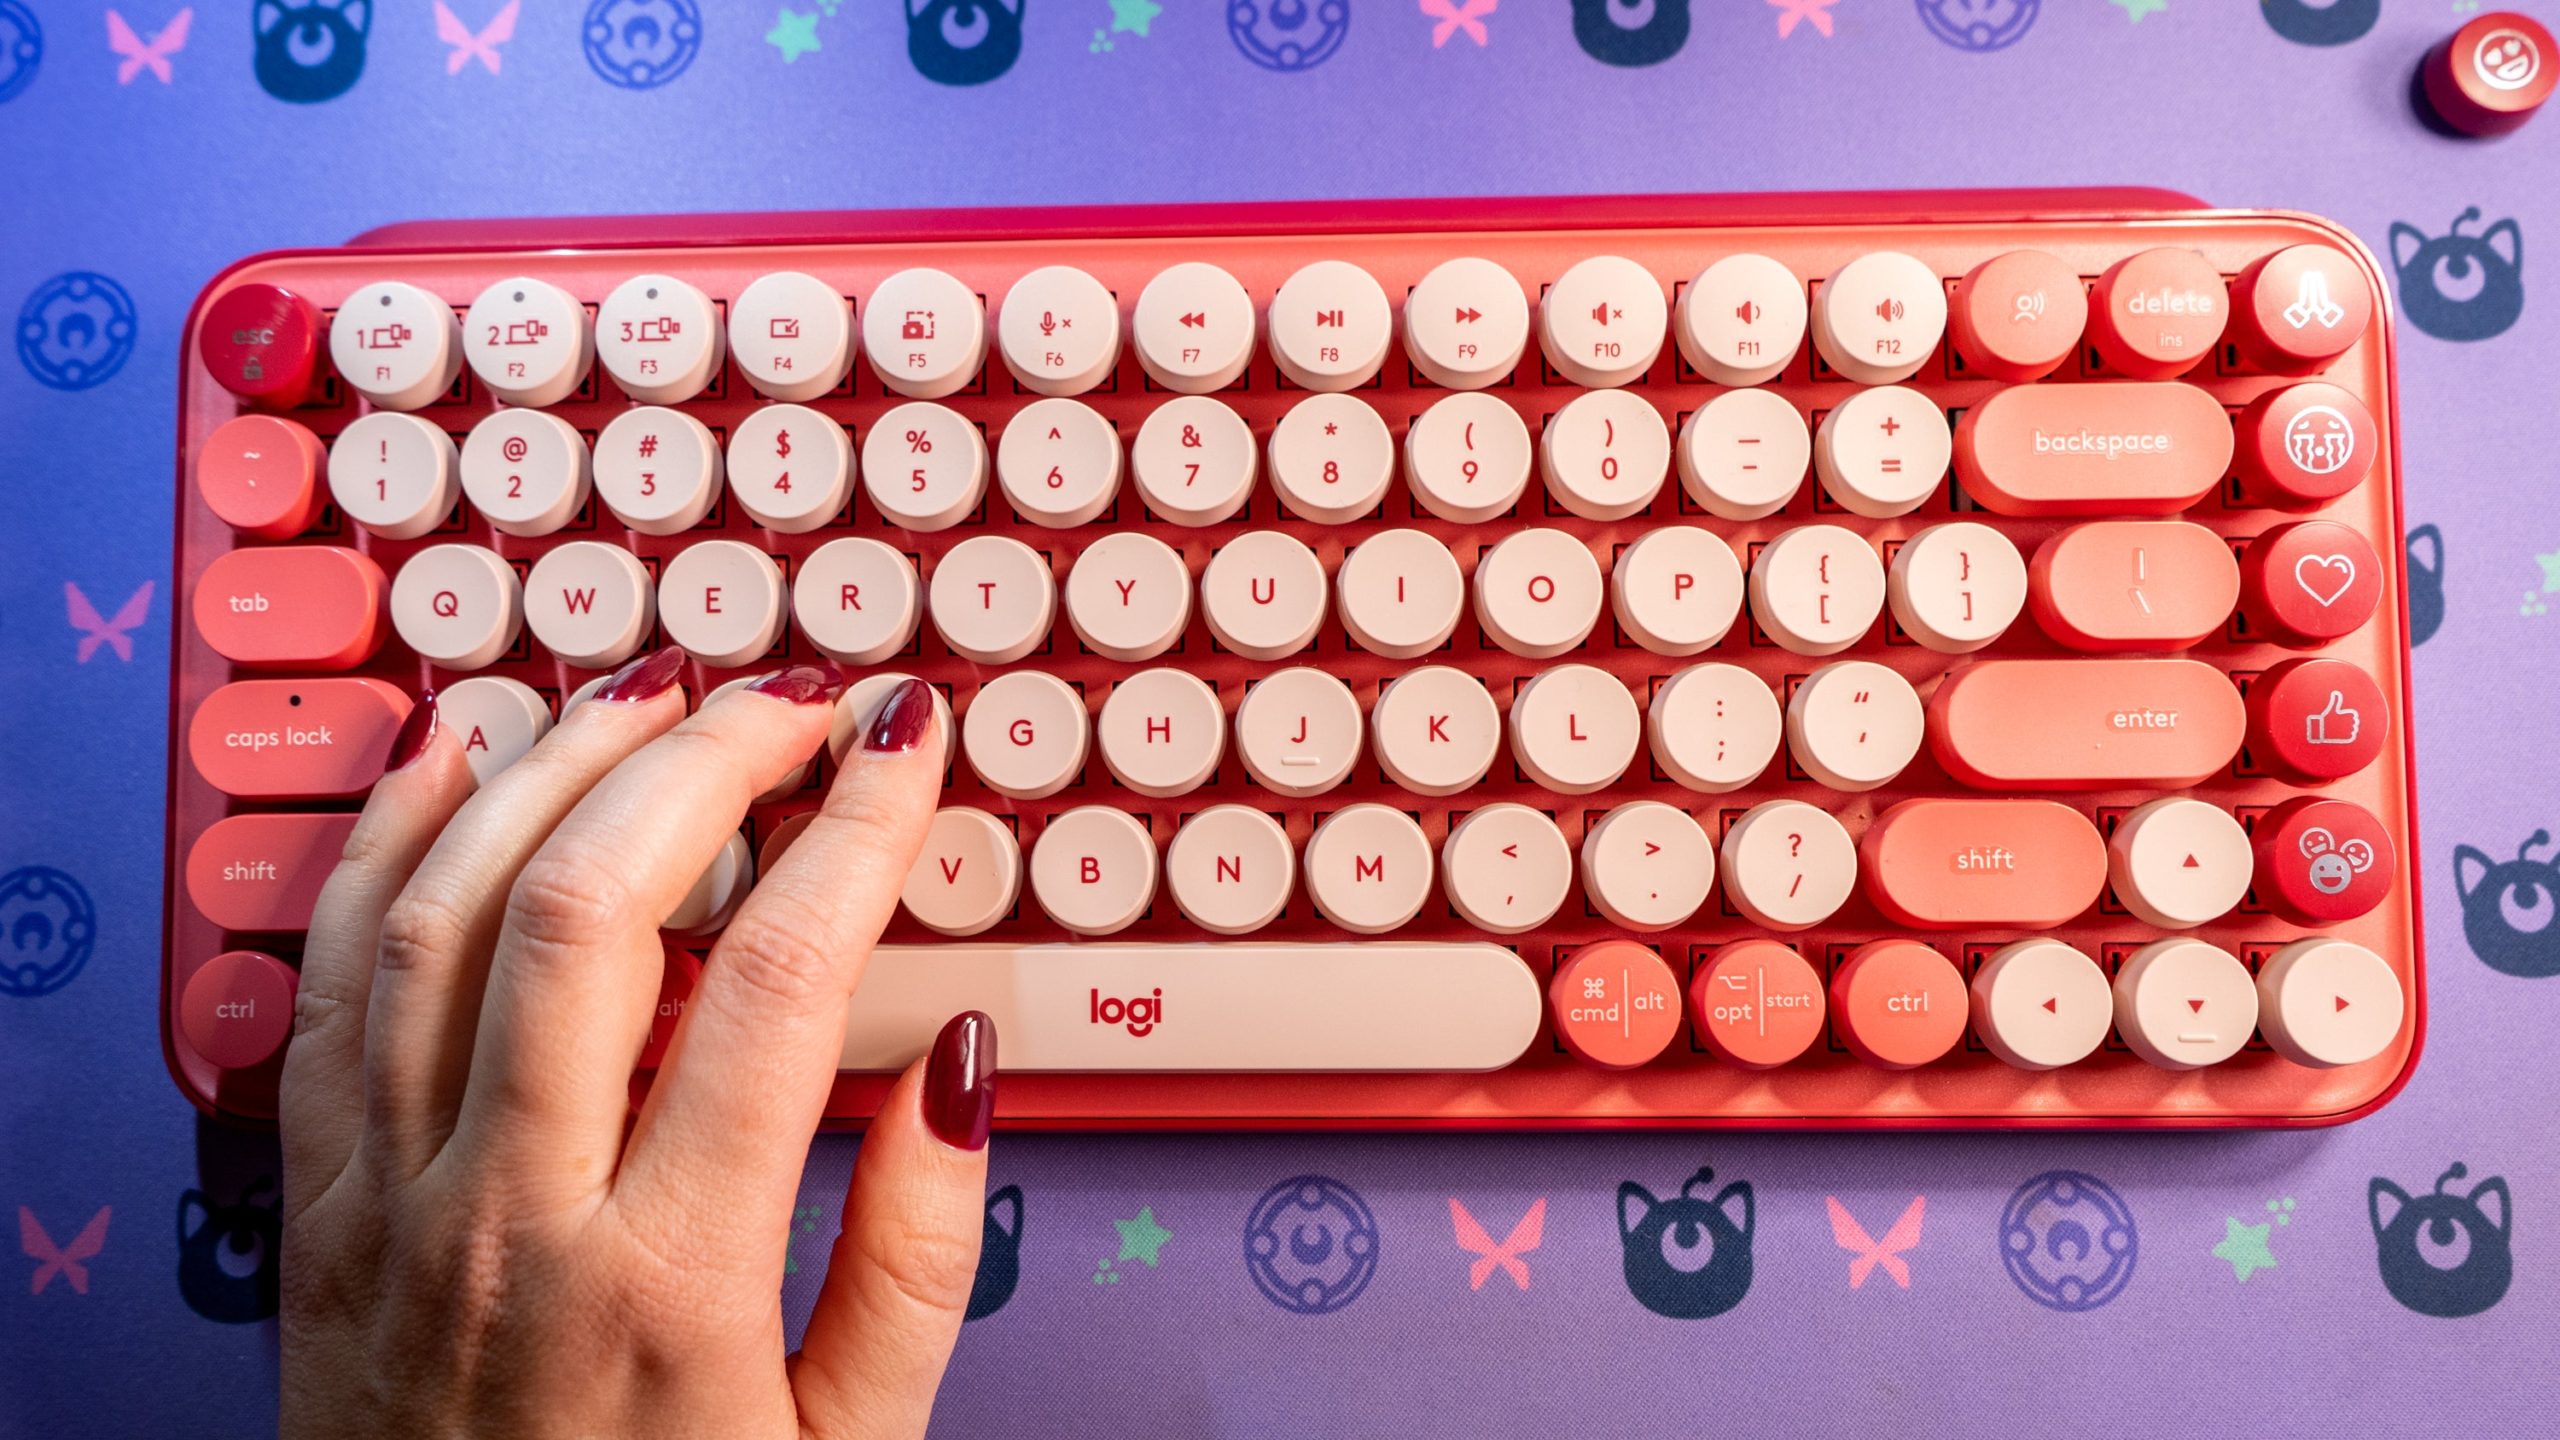 The POP Keys keyboard is comfortable to type on, though a bit loud.  (Photo: Florence Ion / Gizmodo)